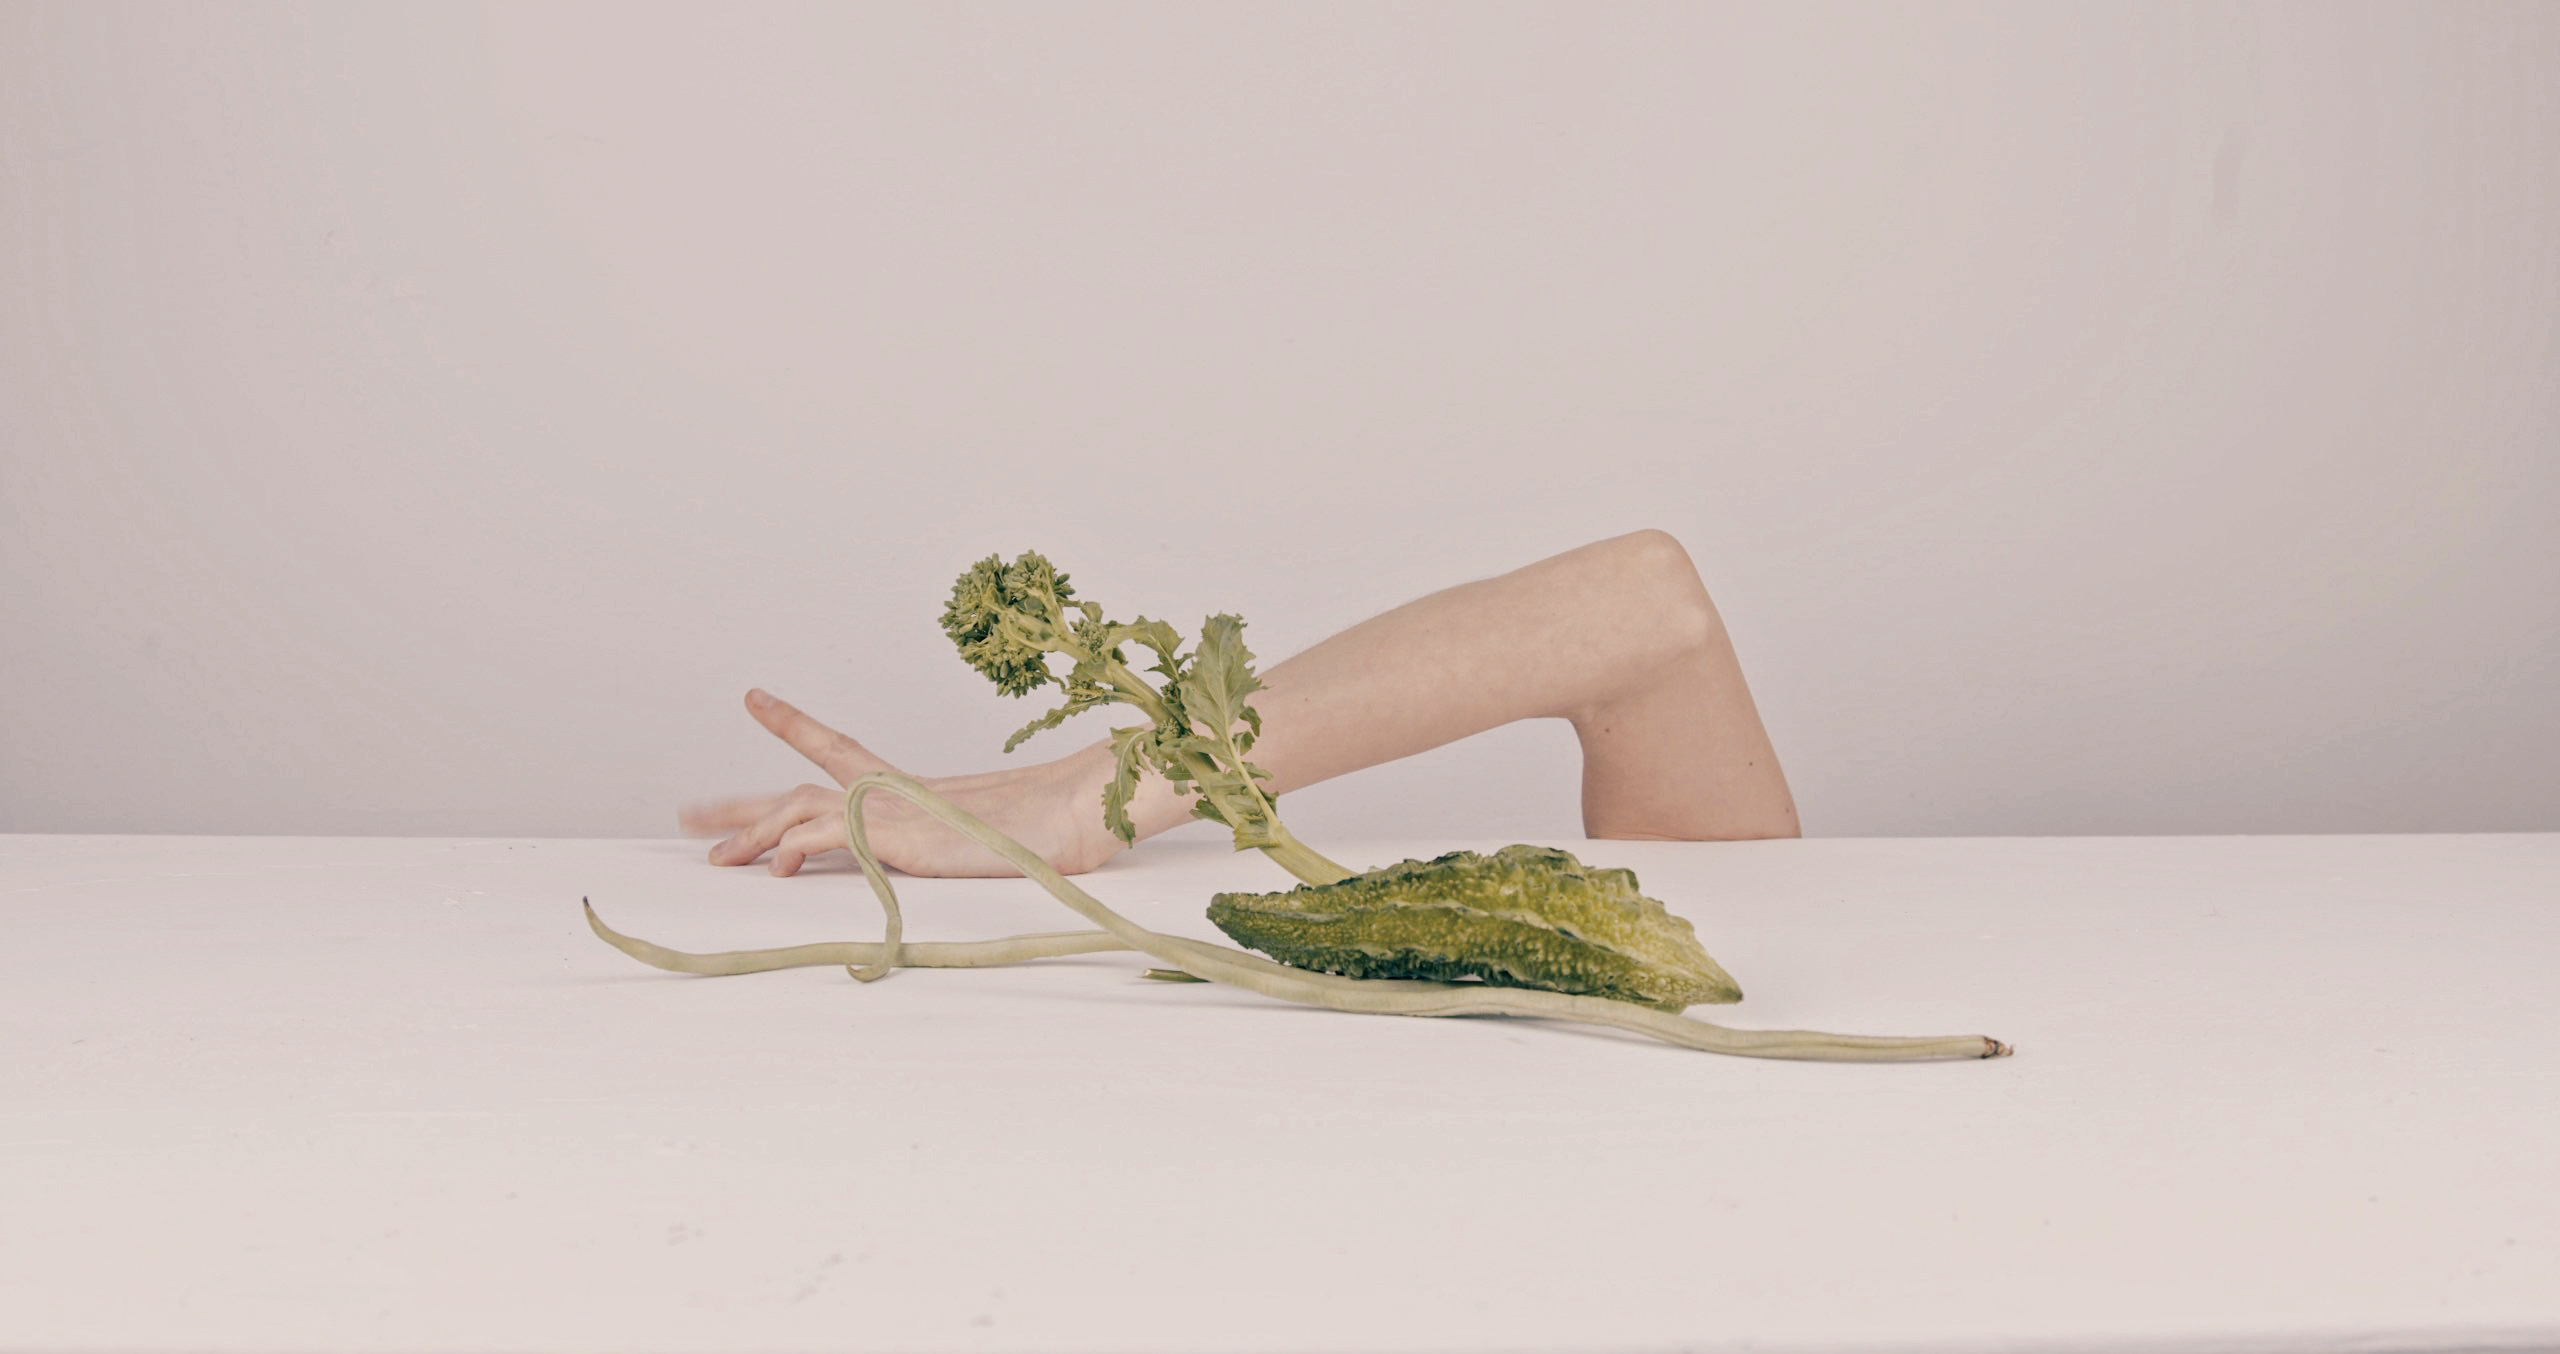 A video still shows a person's arm coming to rest upon a plain white table. Sitting in front is a gourd, a long green bean, and a leafy plant stem.